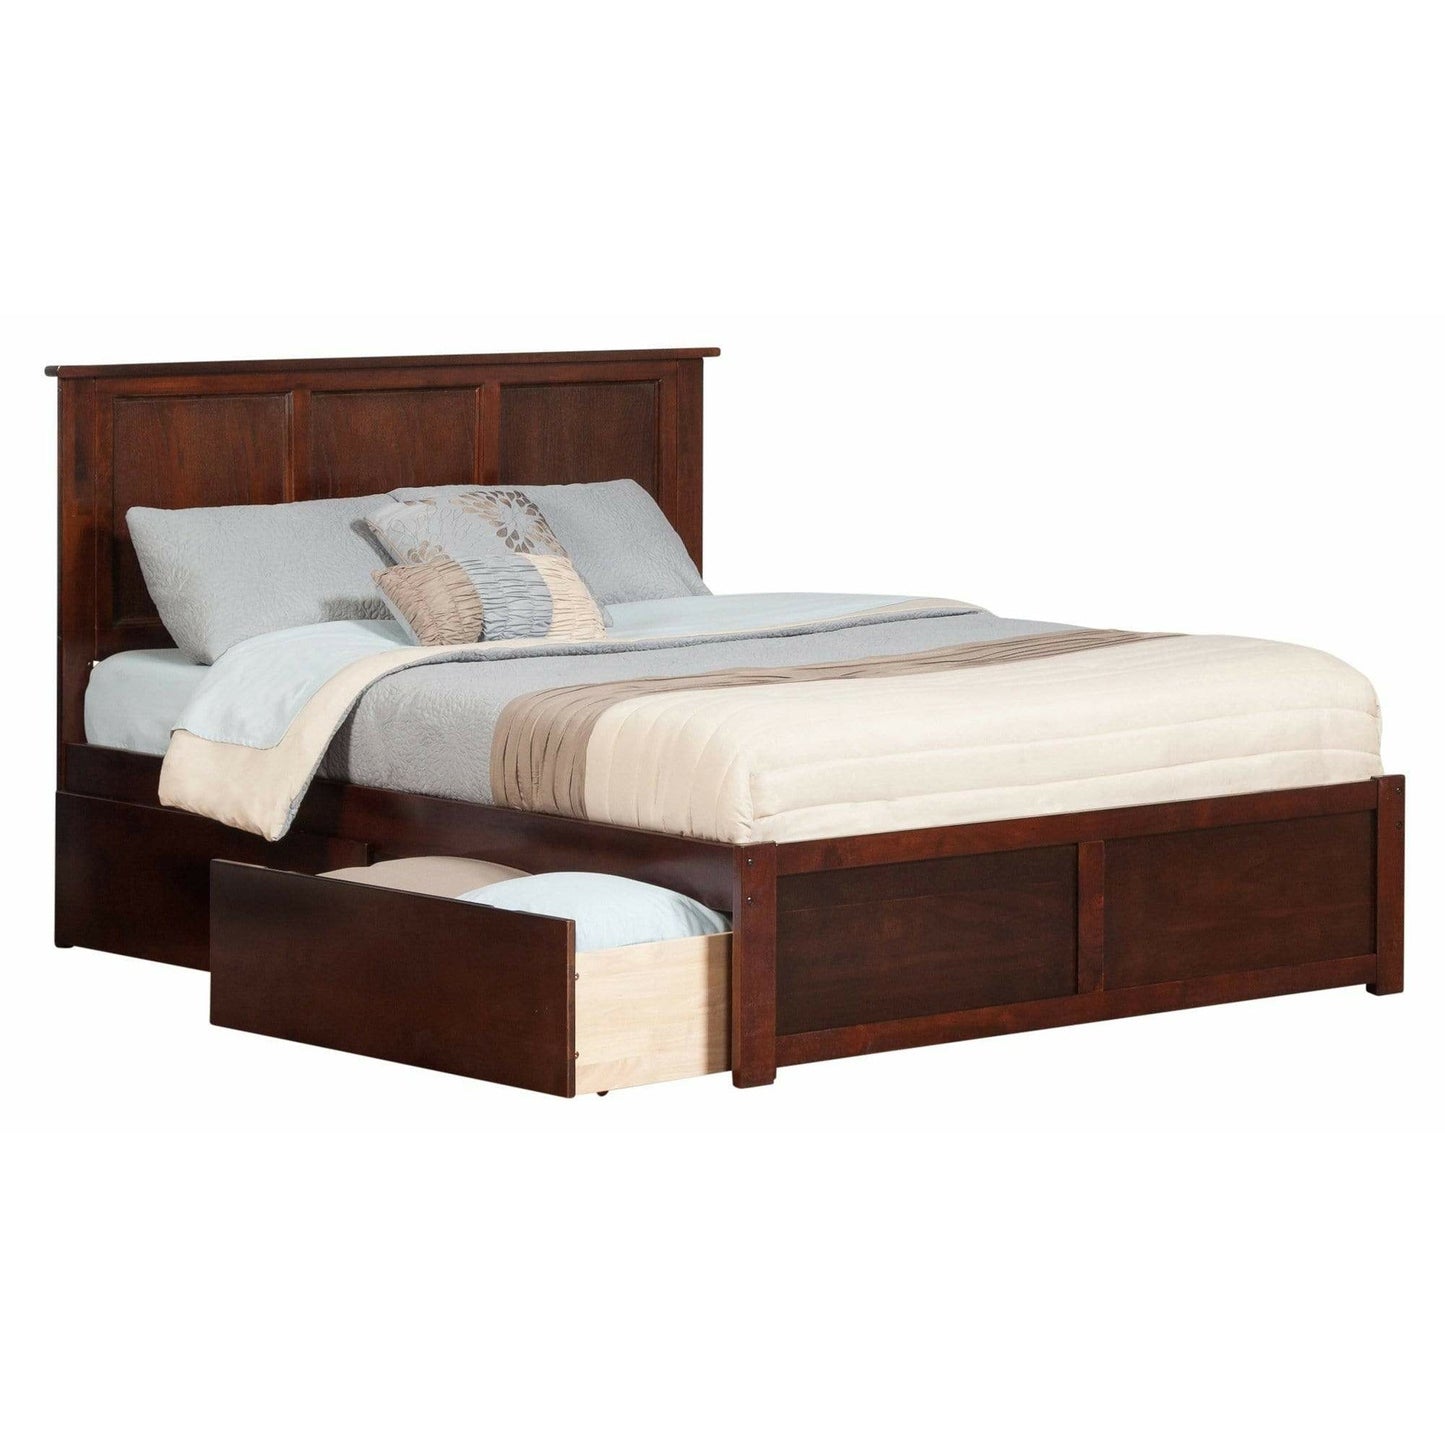 Atlantic Furniture Bed Walnut Madison King Platform Bed with Flat Panel Foot Board and 2 Urban Bed Drawers in Espresso